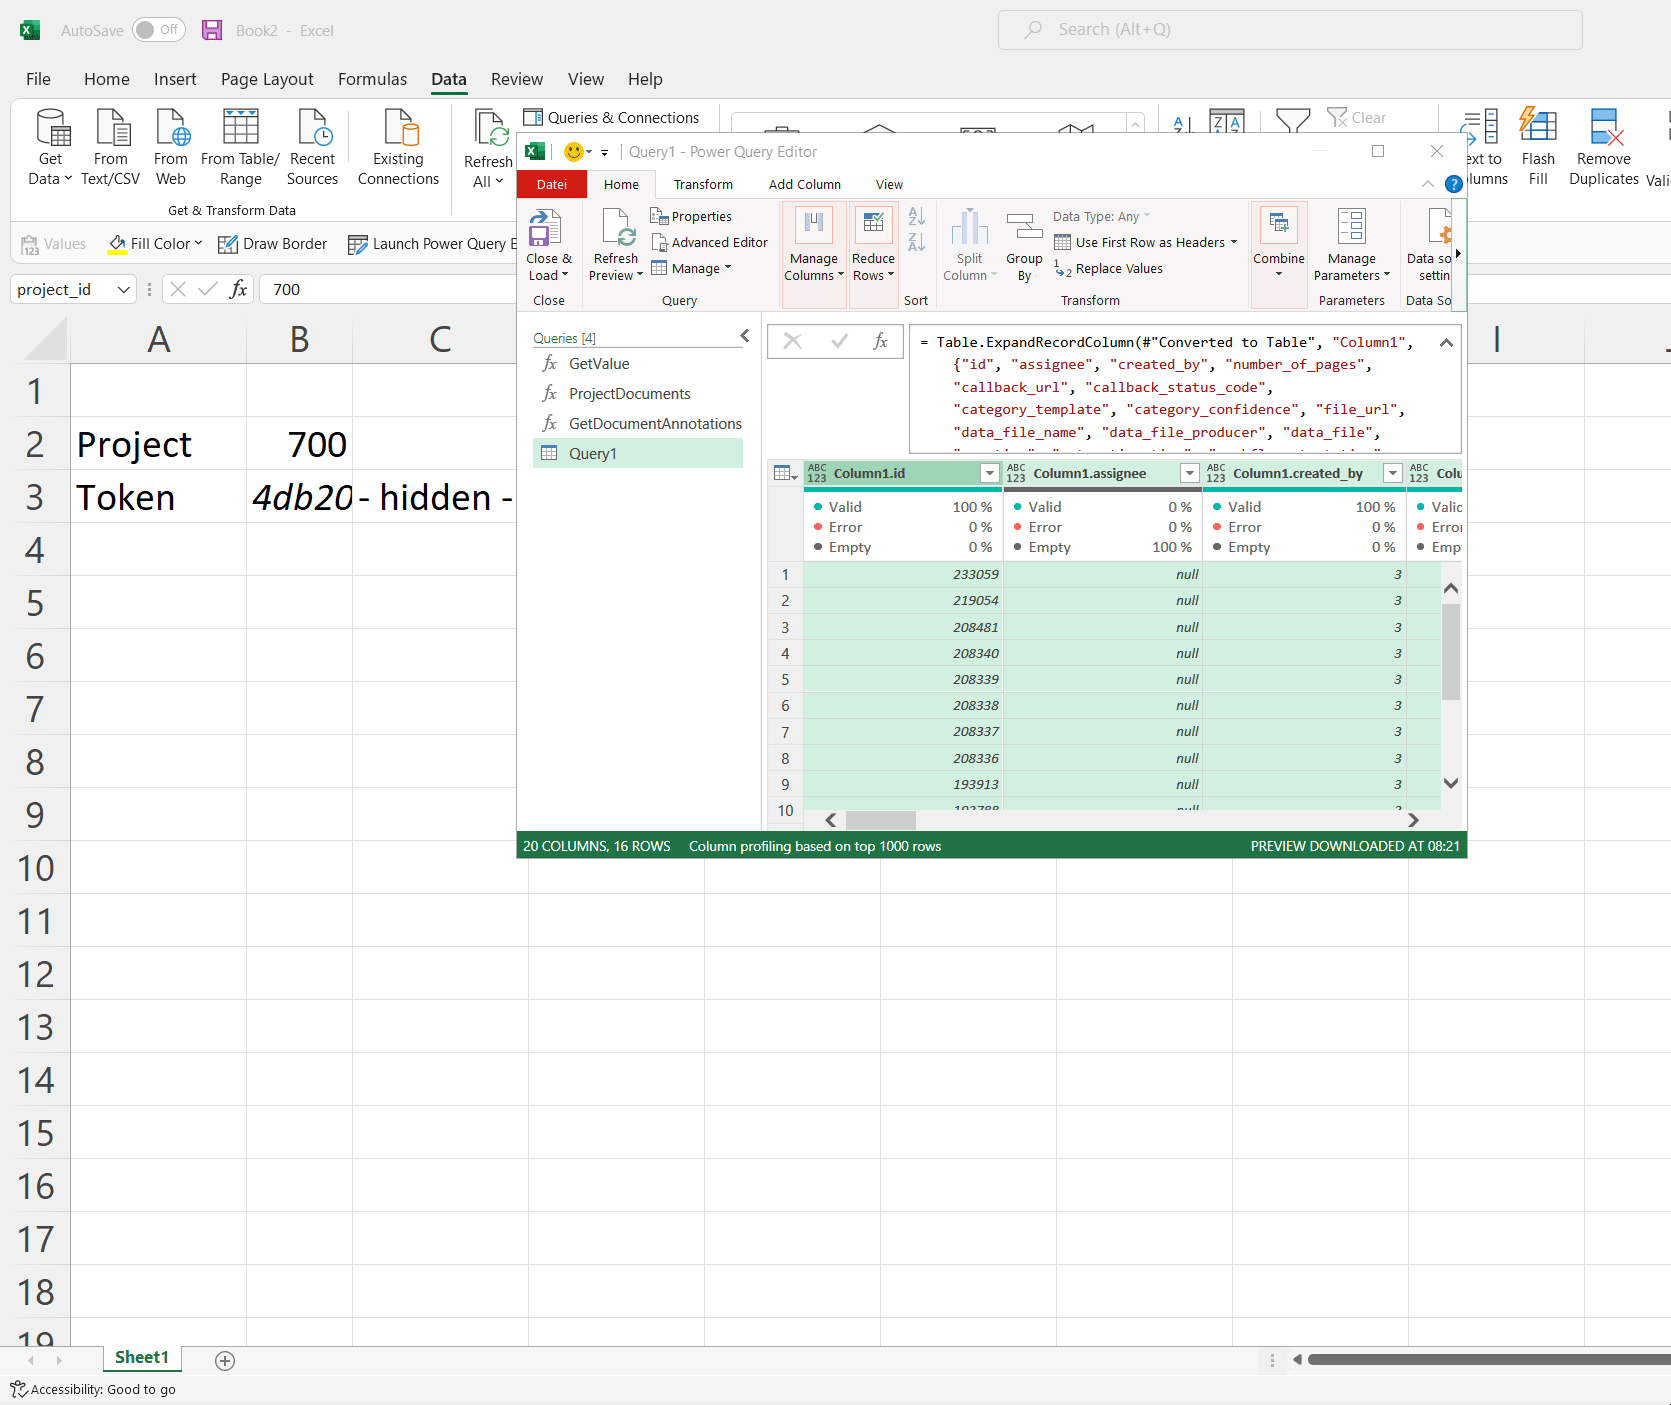 All data from e-mails in Excel at a glance